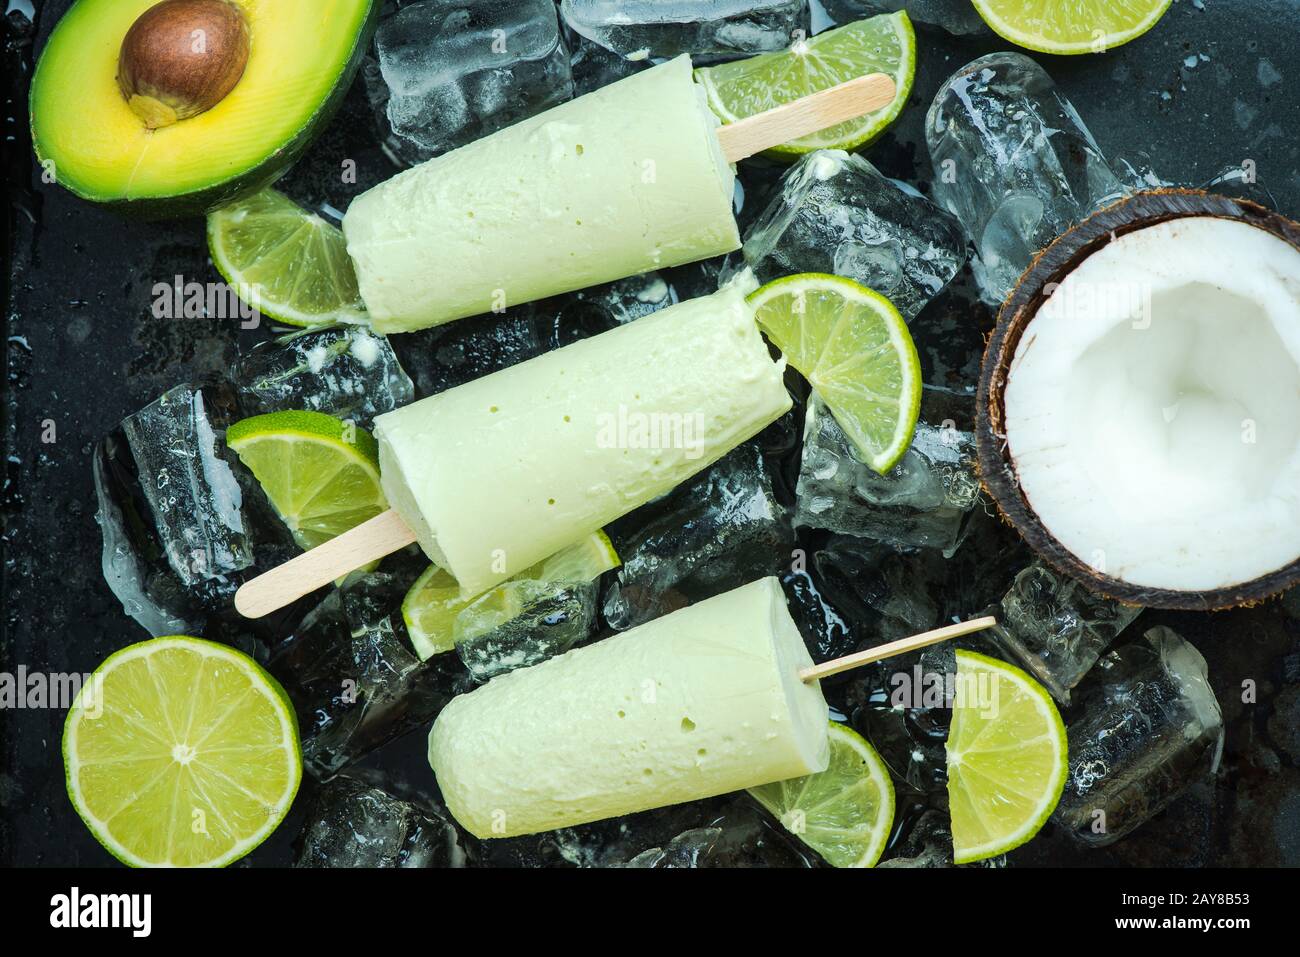 Avocado,lime and coconut healthy trendy popsicles Stock Photo